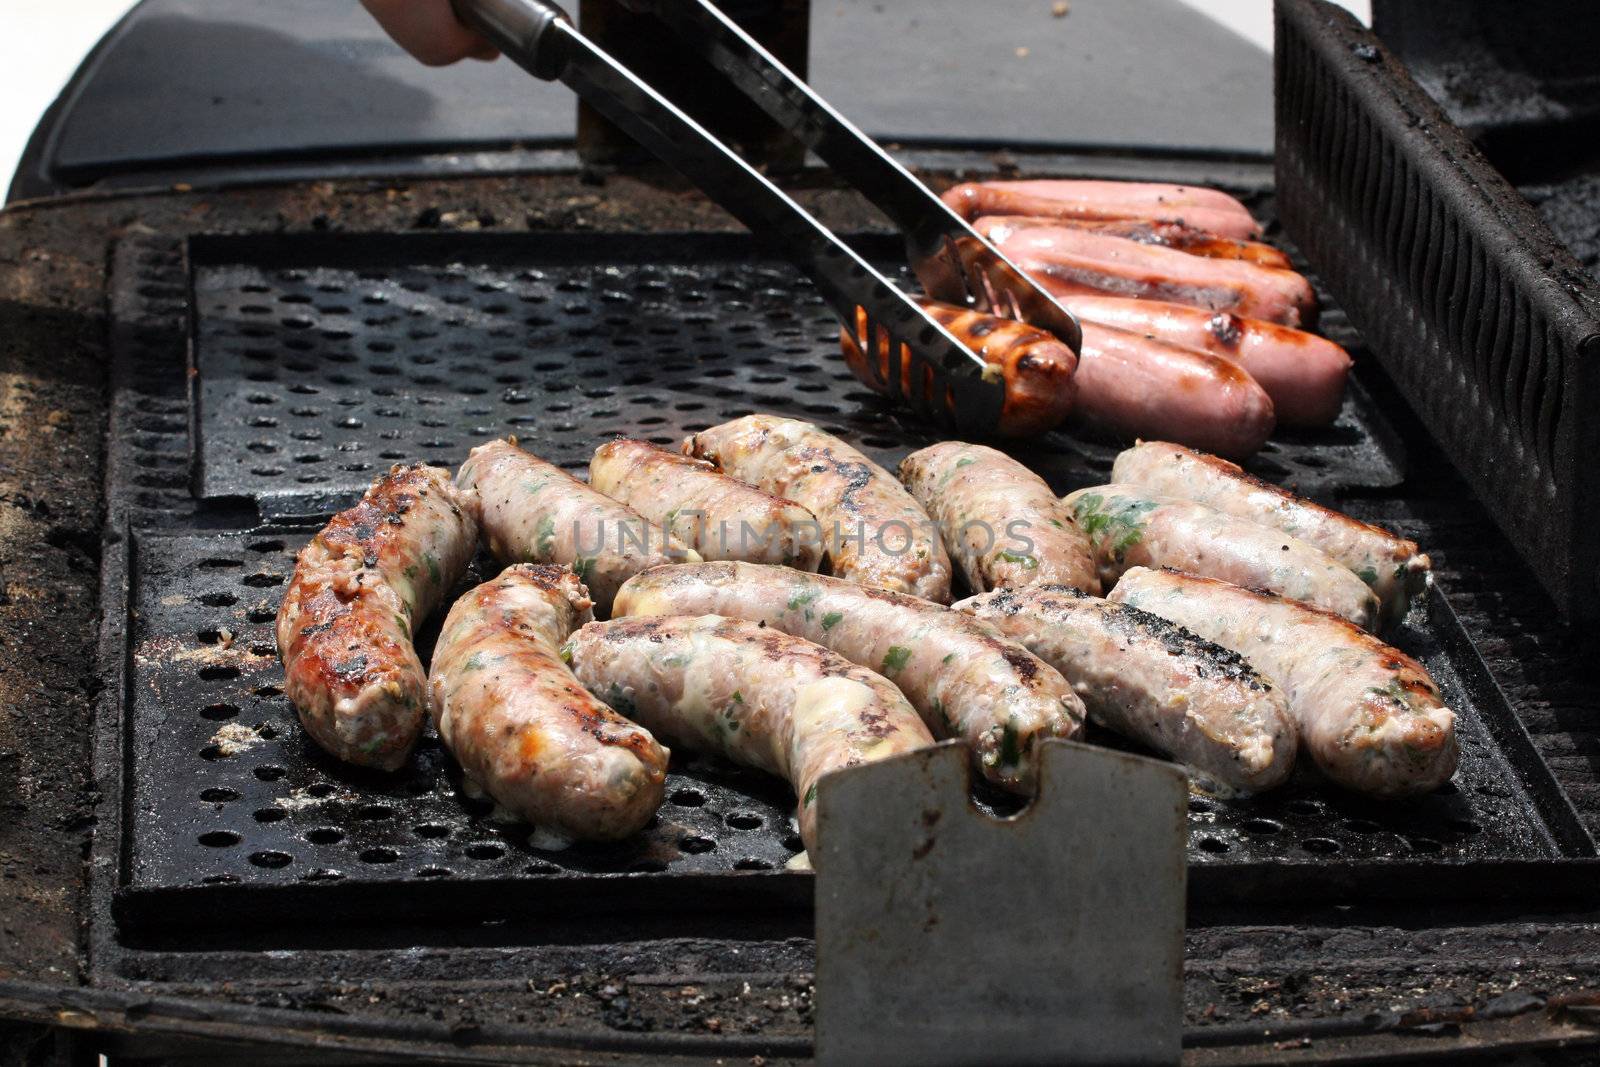 Maltese and Pork sausages on a barbecue